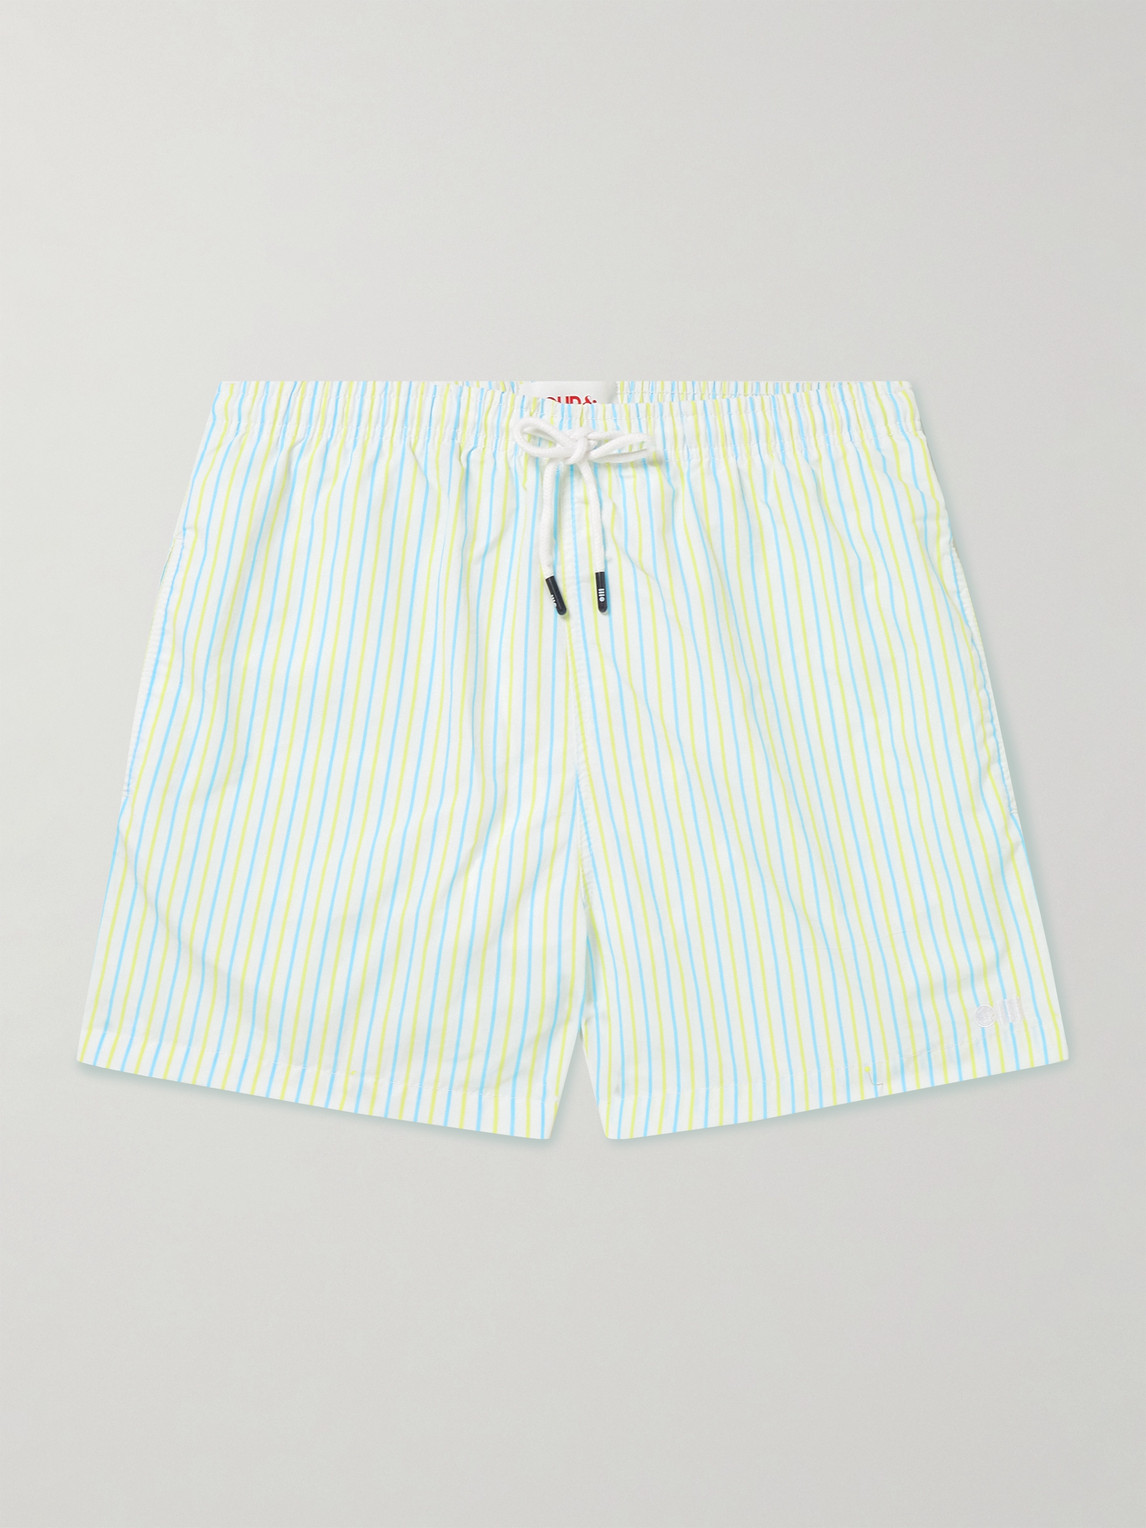 Solid & Striped The Classic Straight-leg Mid-length Striped Swim Shorts In Cerulean Blue X Pear Stripe